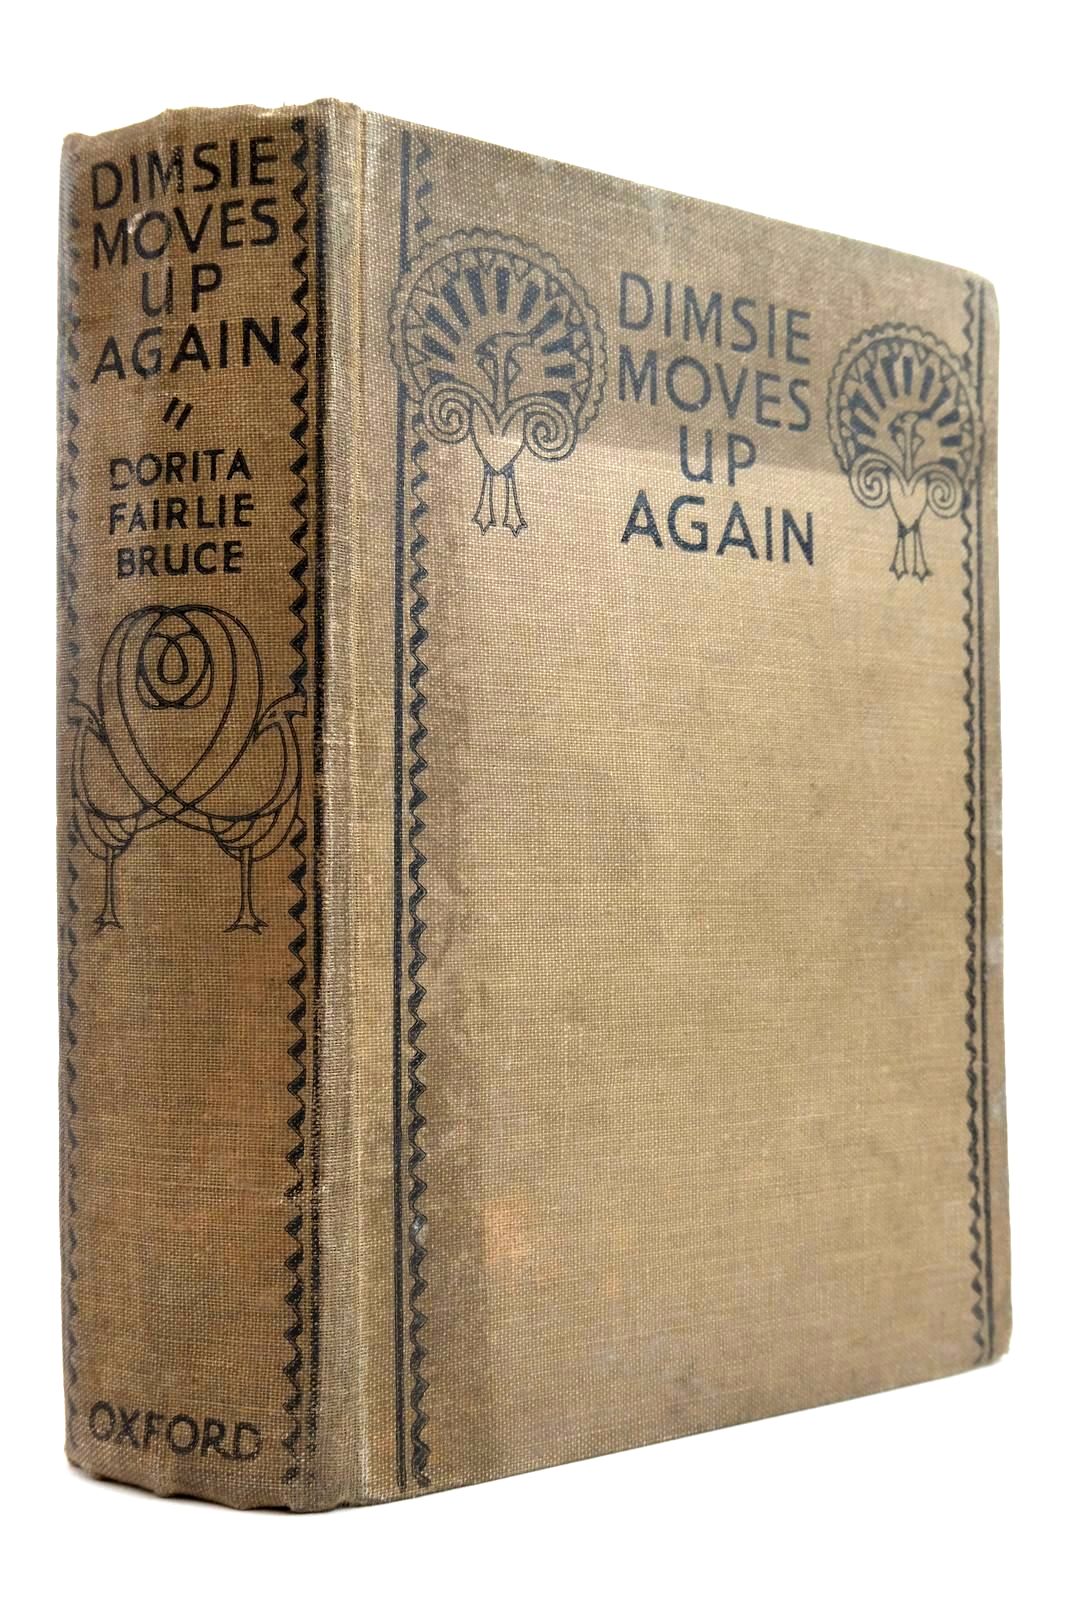 Photo of DIMSIE MOVES UP AGAIN written by Bruce, Dorita Fairlie published by Oxford University Press, Humphrey Milford (STOCK CODE: 2135777)  for sale by Stella & Rose's Books